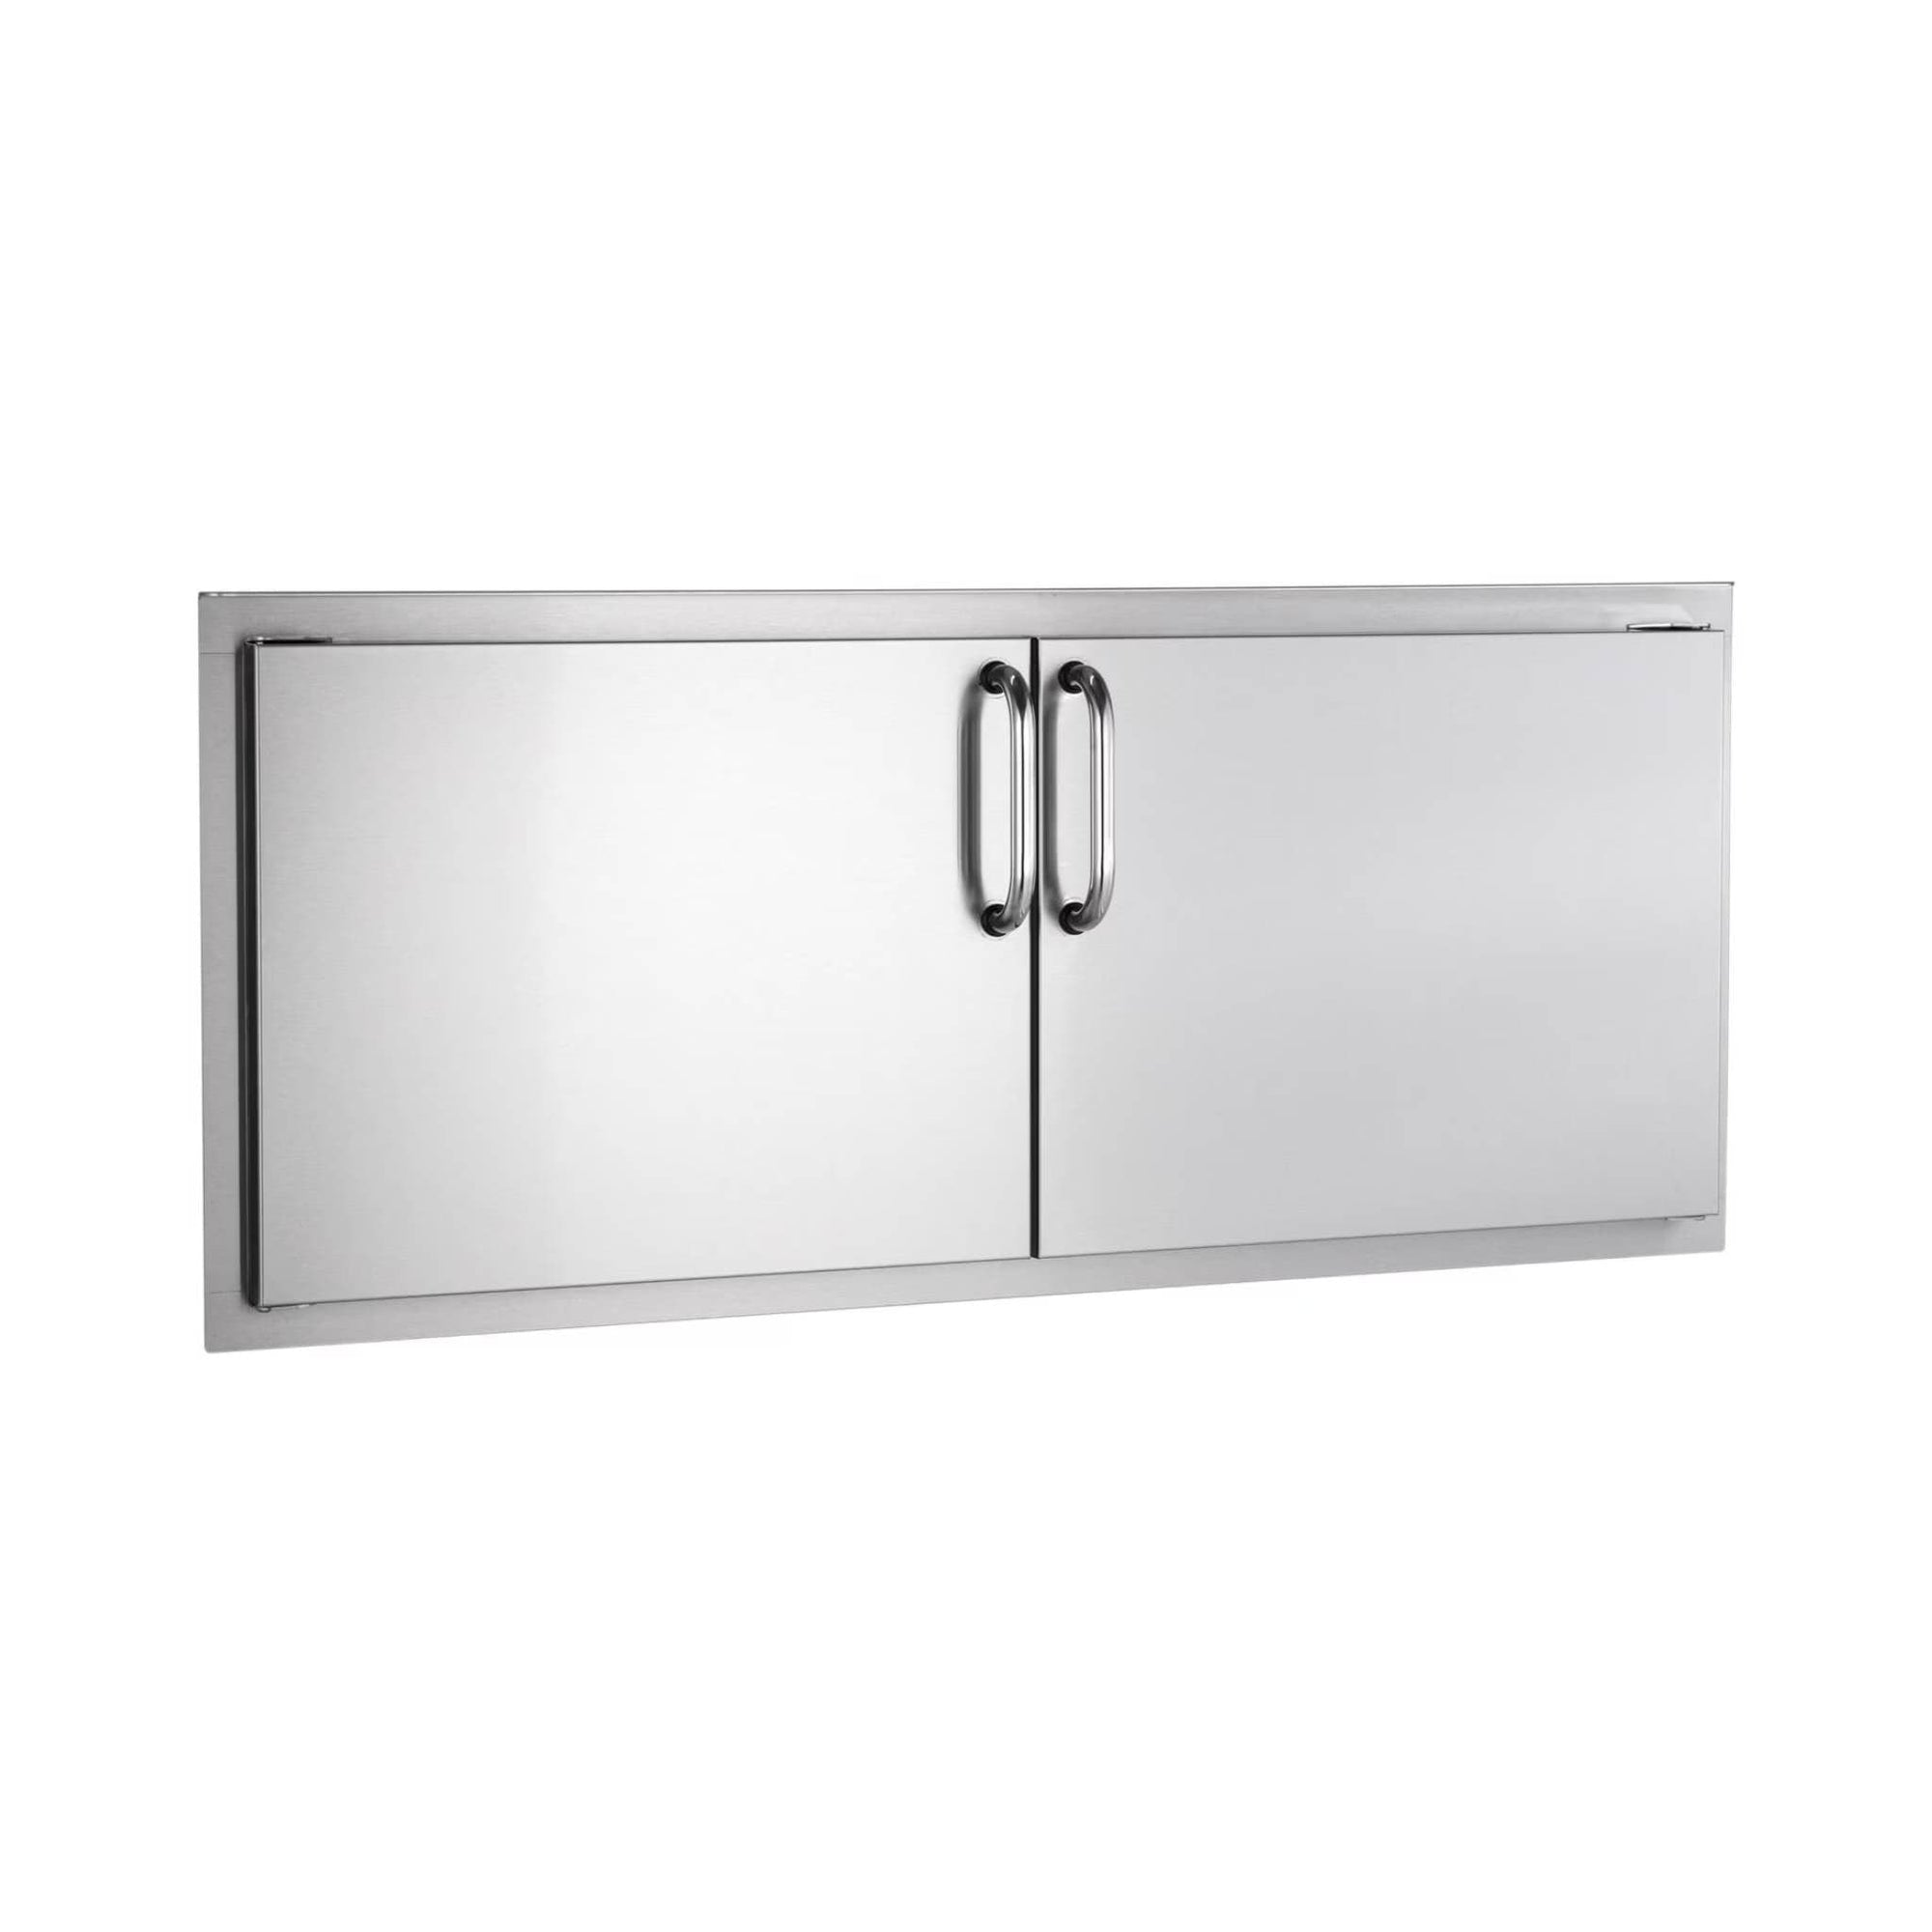 AOG 39" Double Access Door - Culinary Hardware